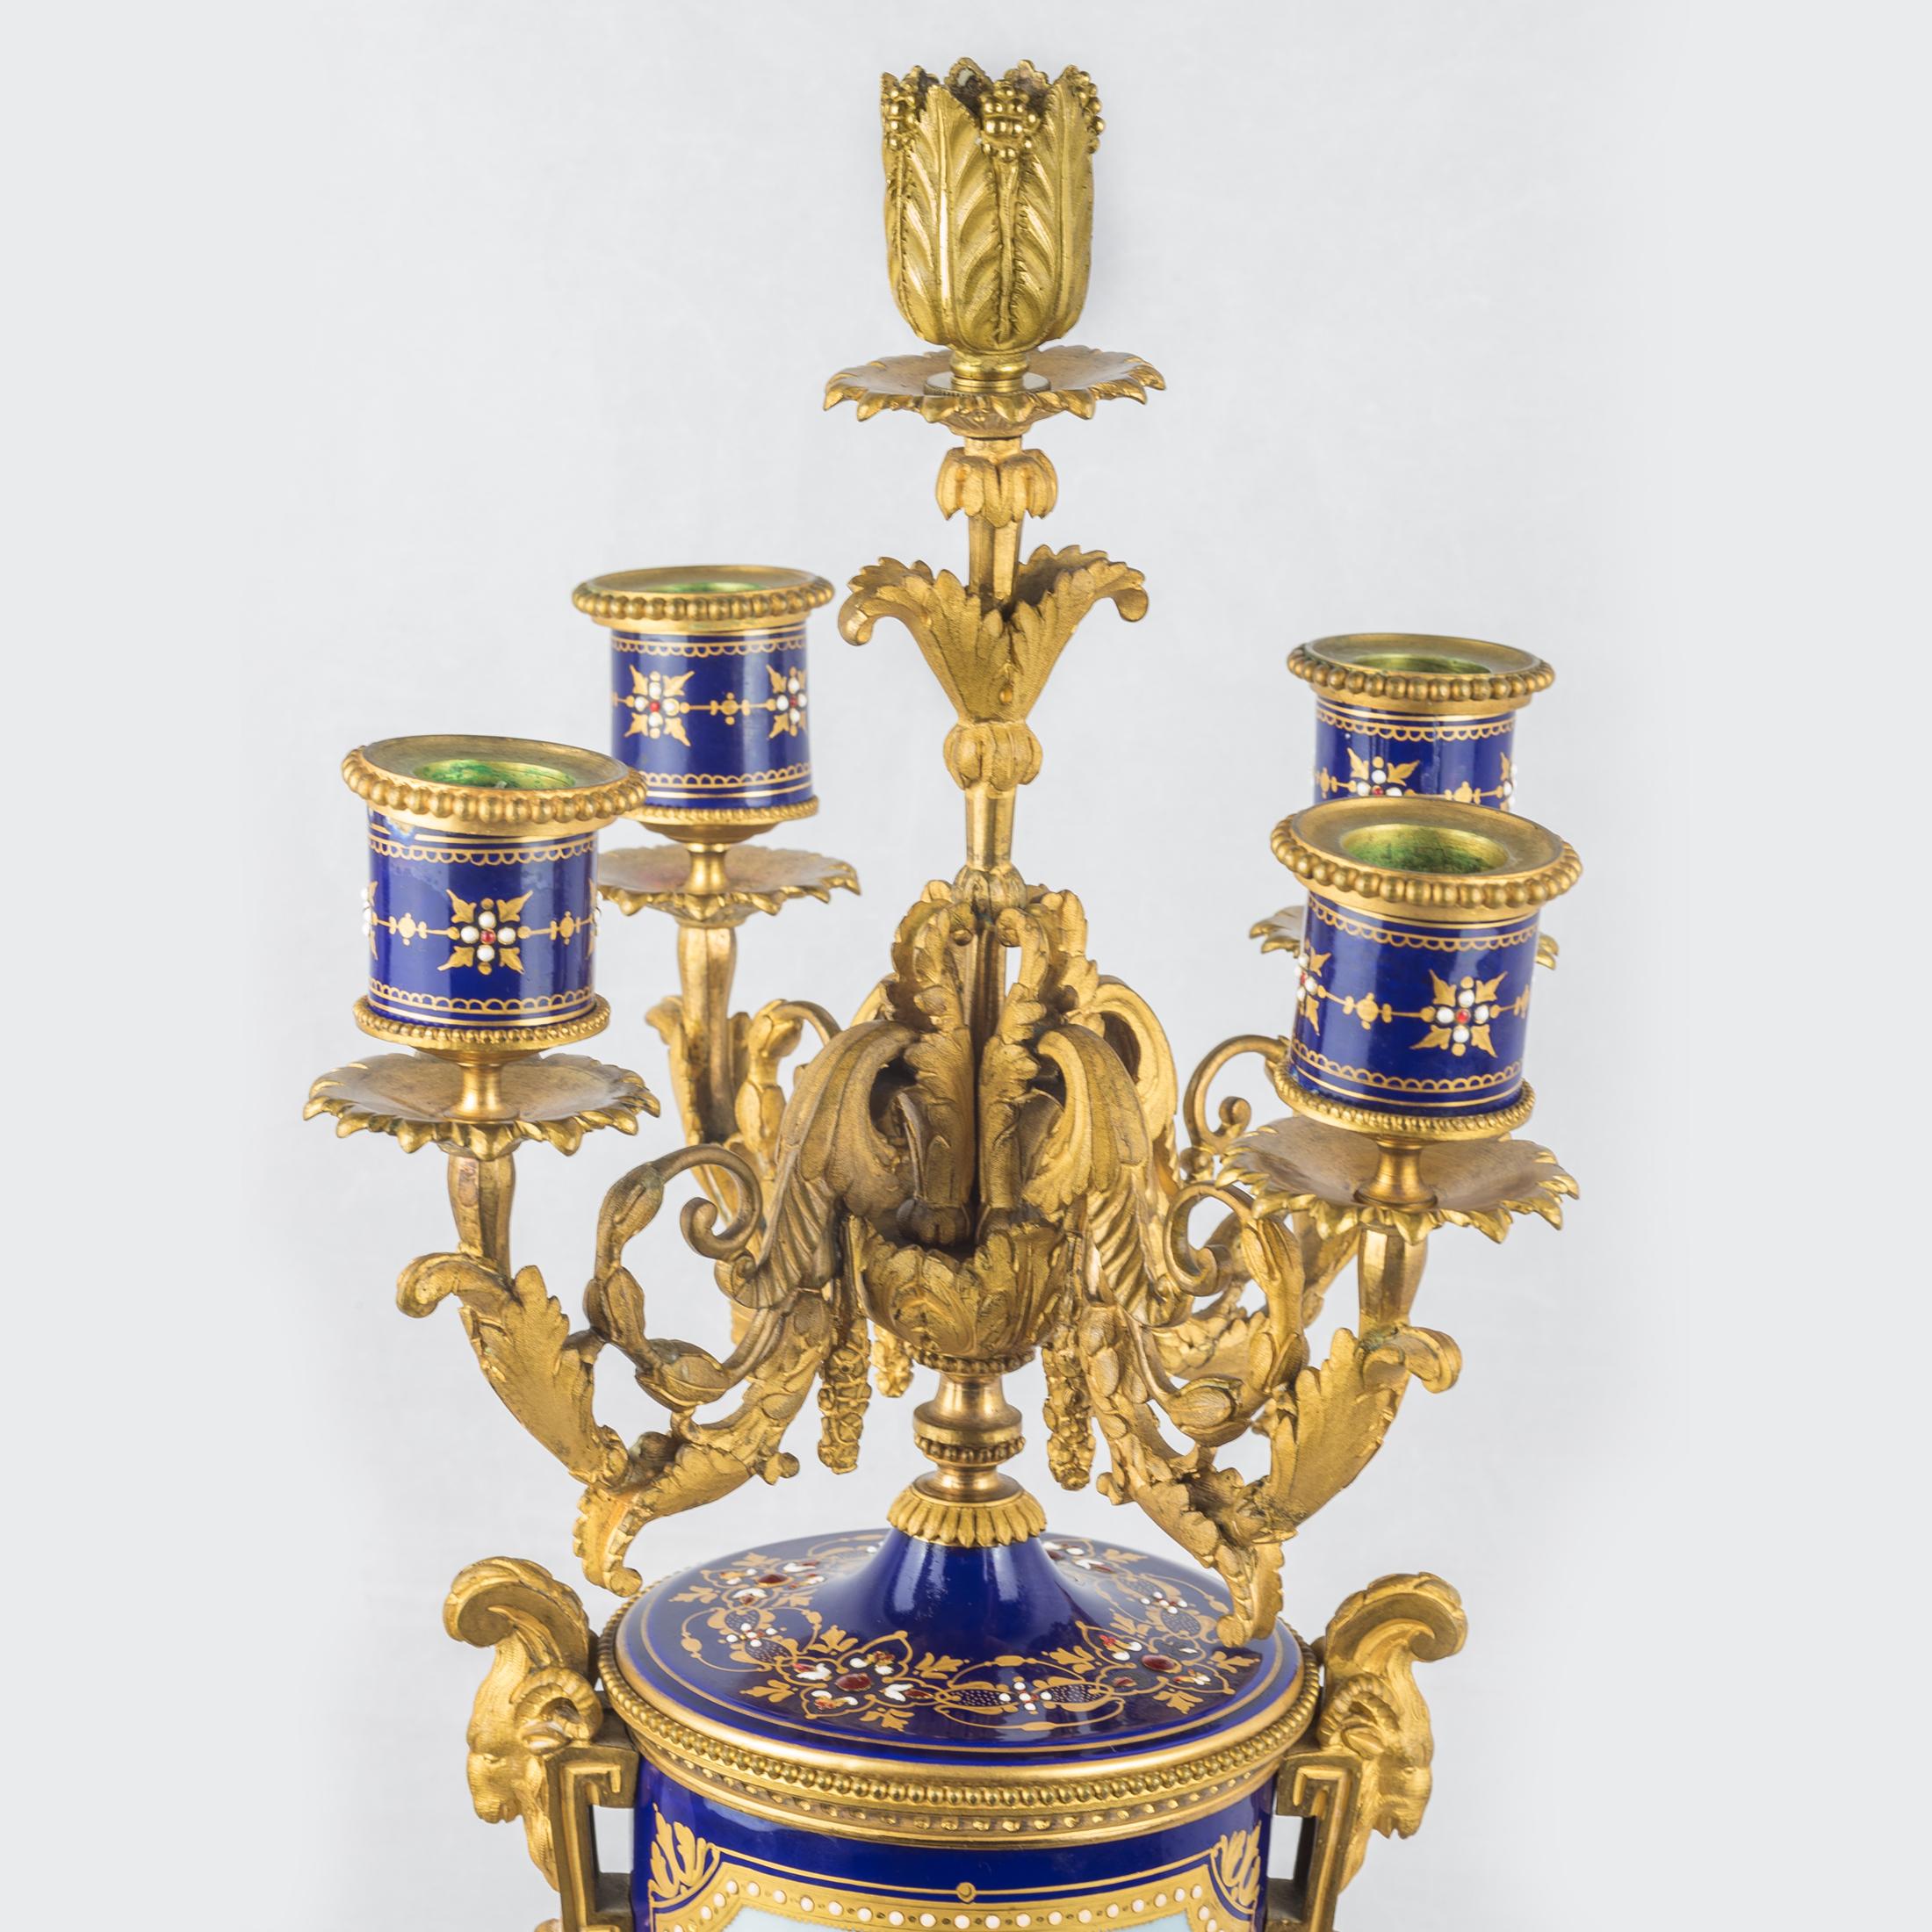 An exquisite pair of four-branch gilt bronze and jeweled cobalt blue ground Sèvres style Porcelain candelabras.

Date: 19th century
Origin: French
Dimension: 24 1/2 in x 9 1/2 in.
     